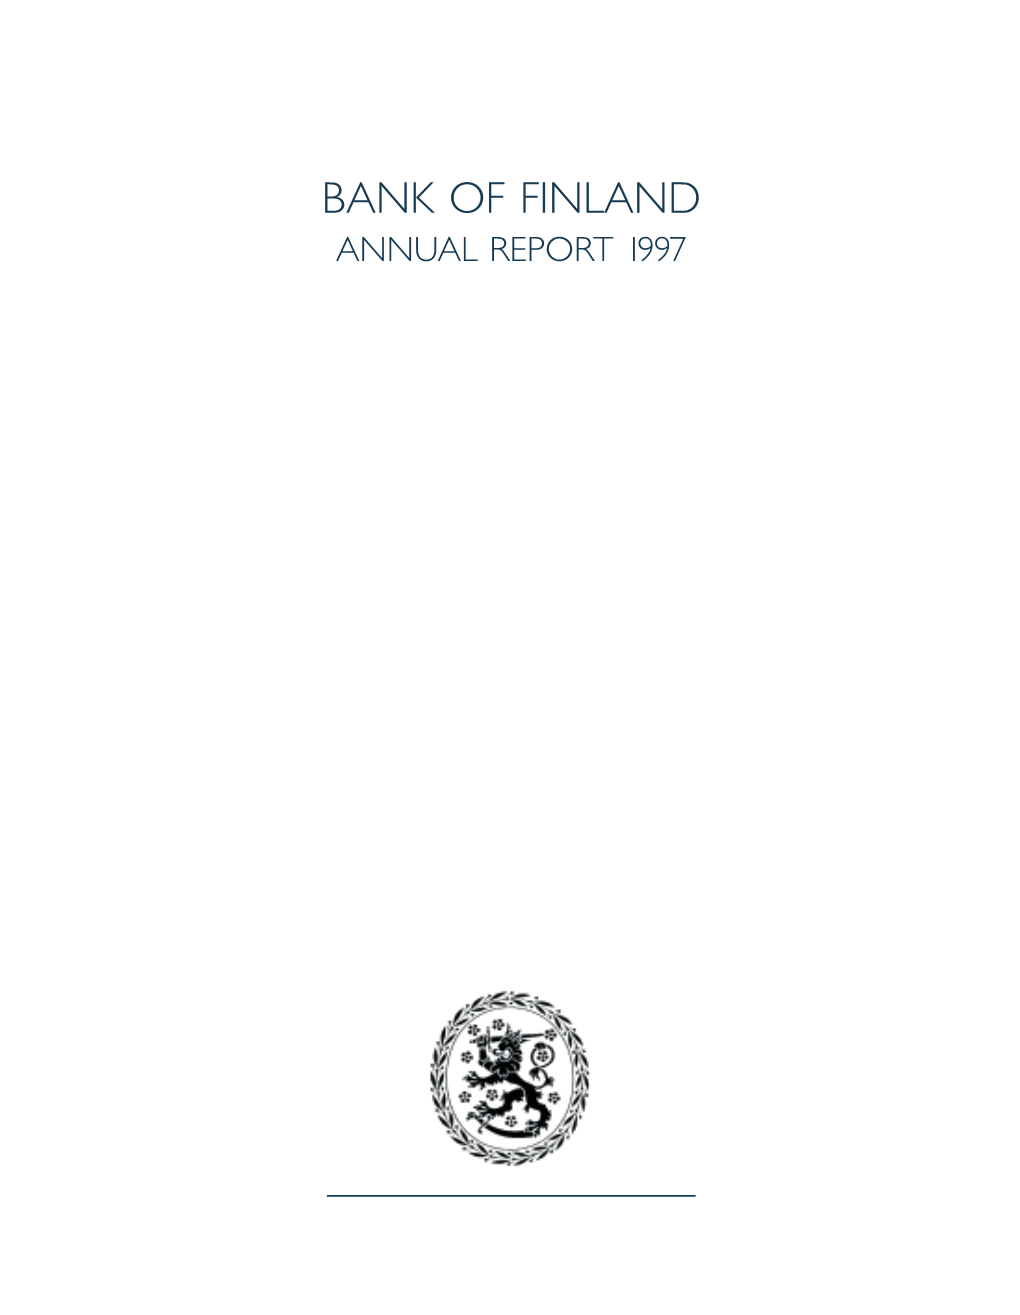 BANK of FINLAND ANNUAL REPORT 1997 the Figures in the Annual Report Are Based on Data Available in February 1998